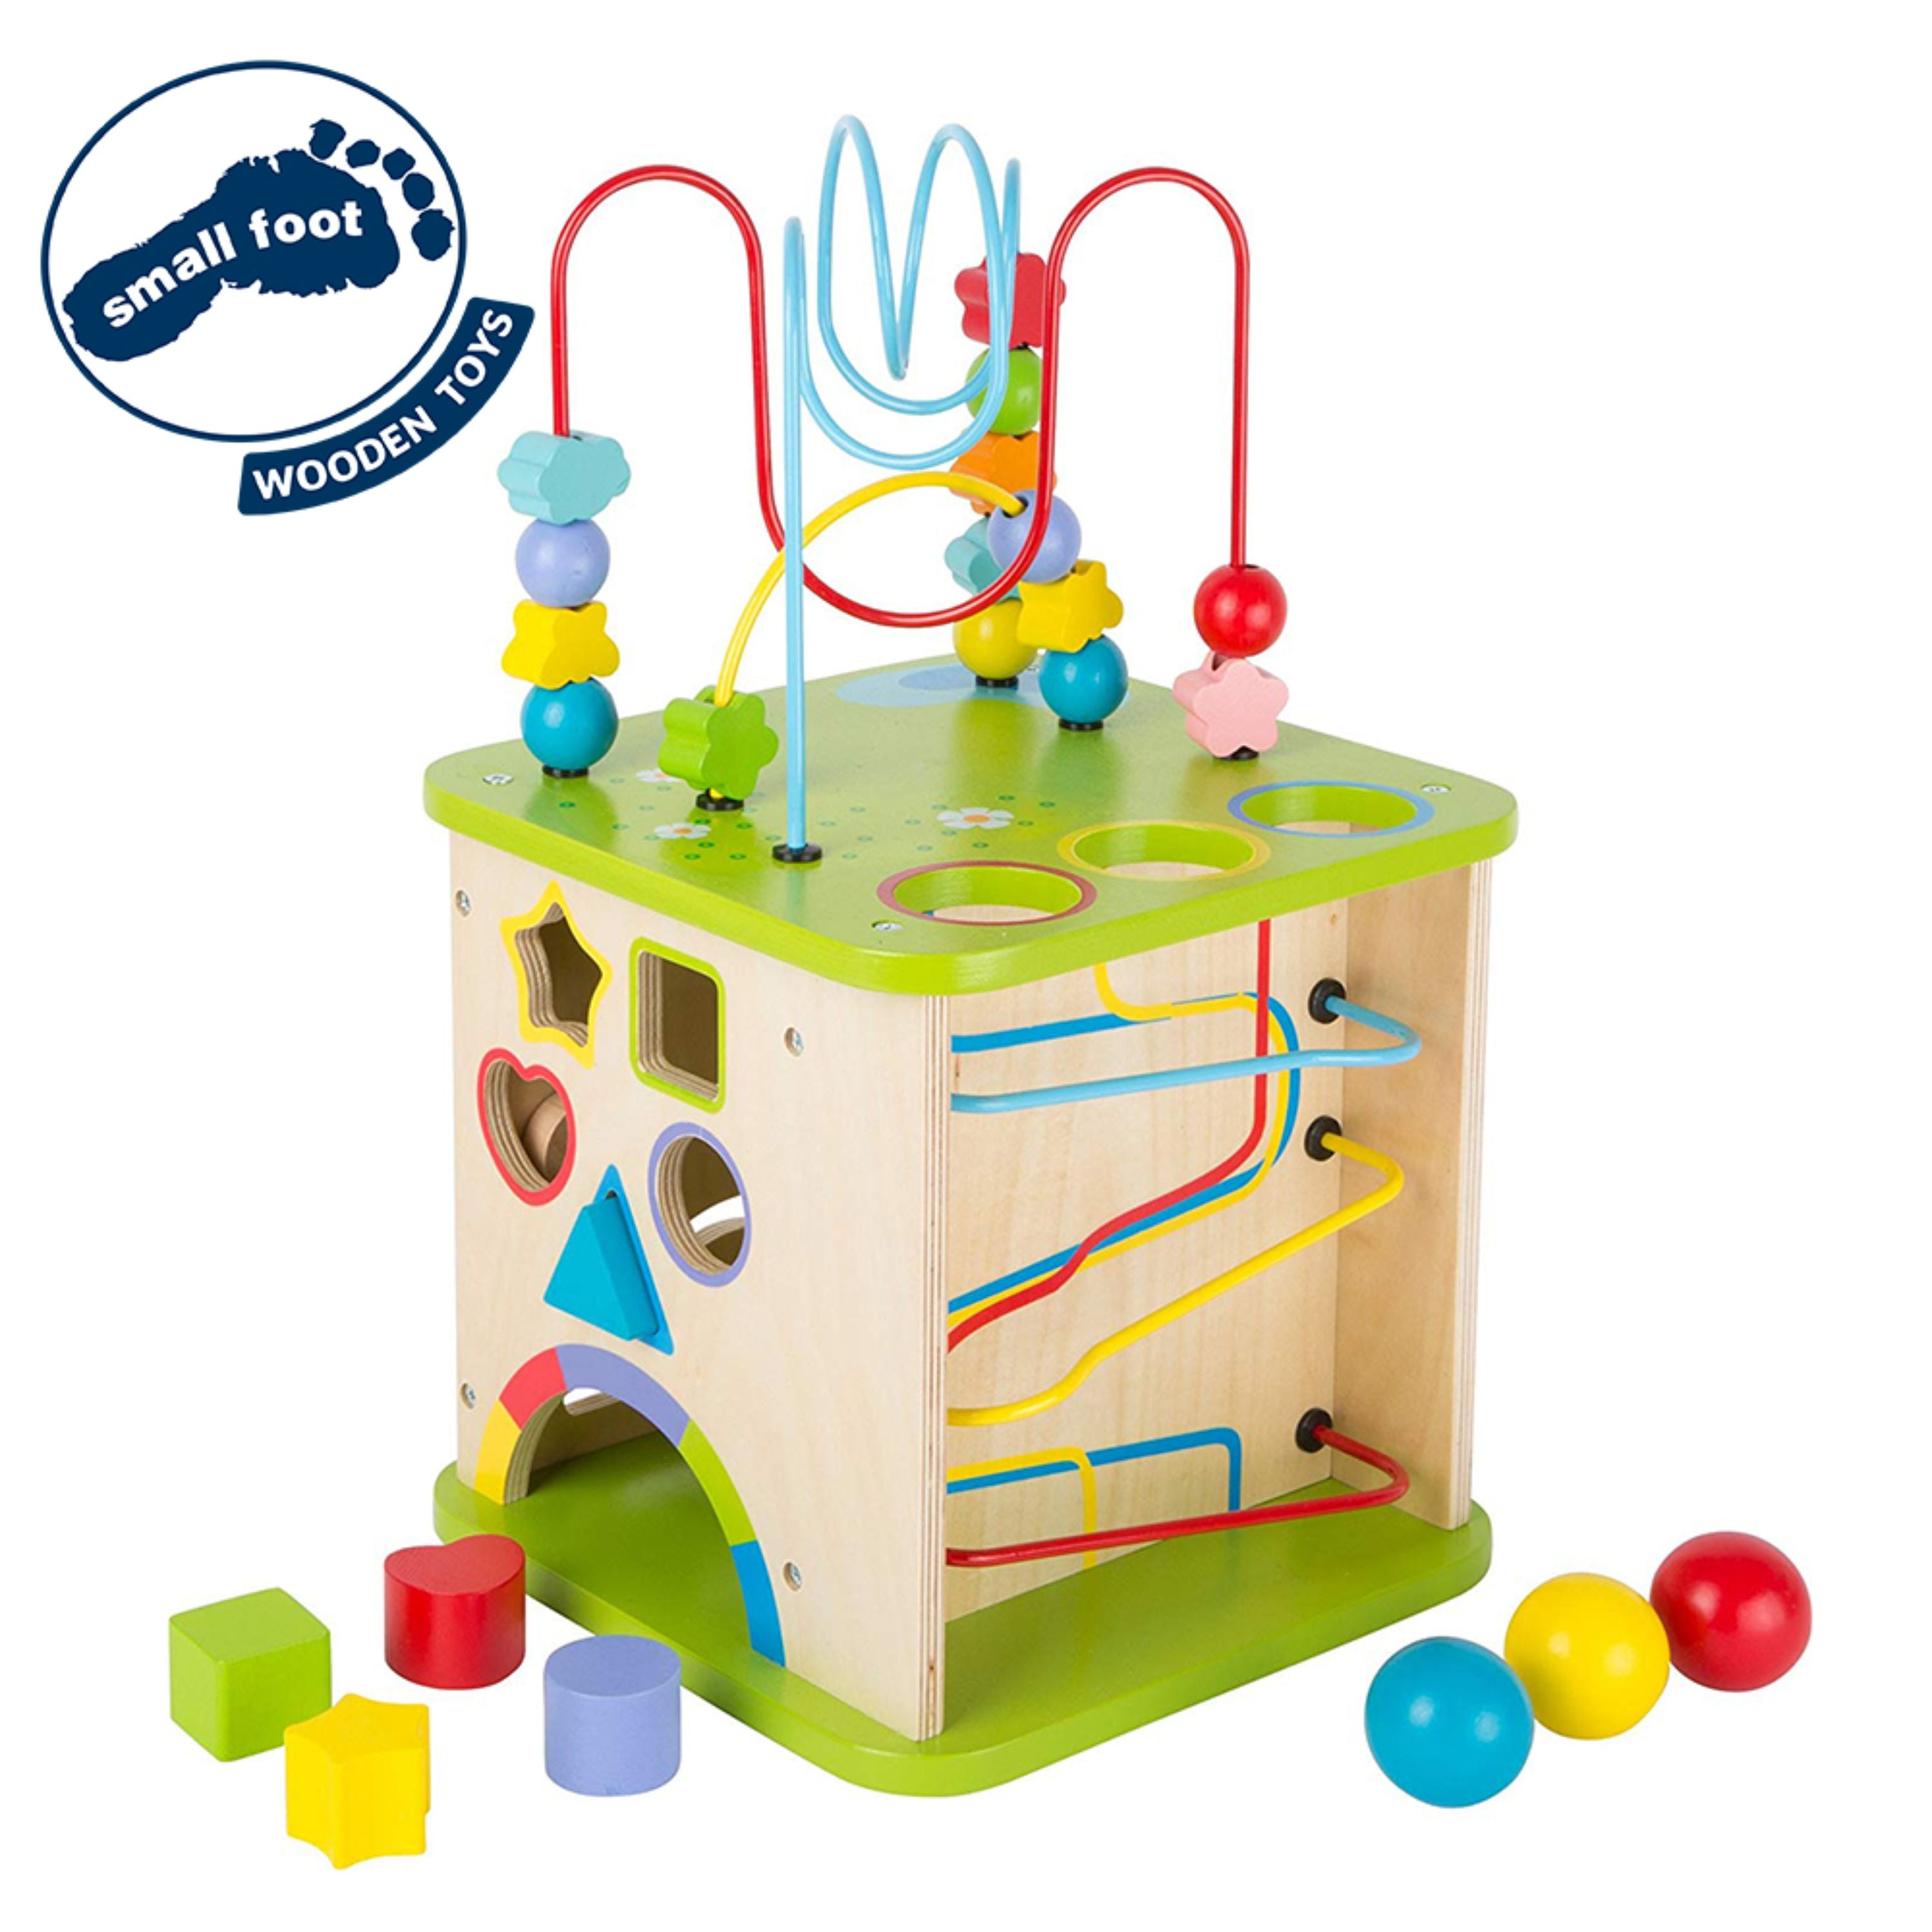 WOODEN ACTIVITY CUBE FOR BABYS TODDLERS LEARNING ACTIVE PLAYING WOODEN TOYS 